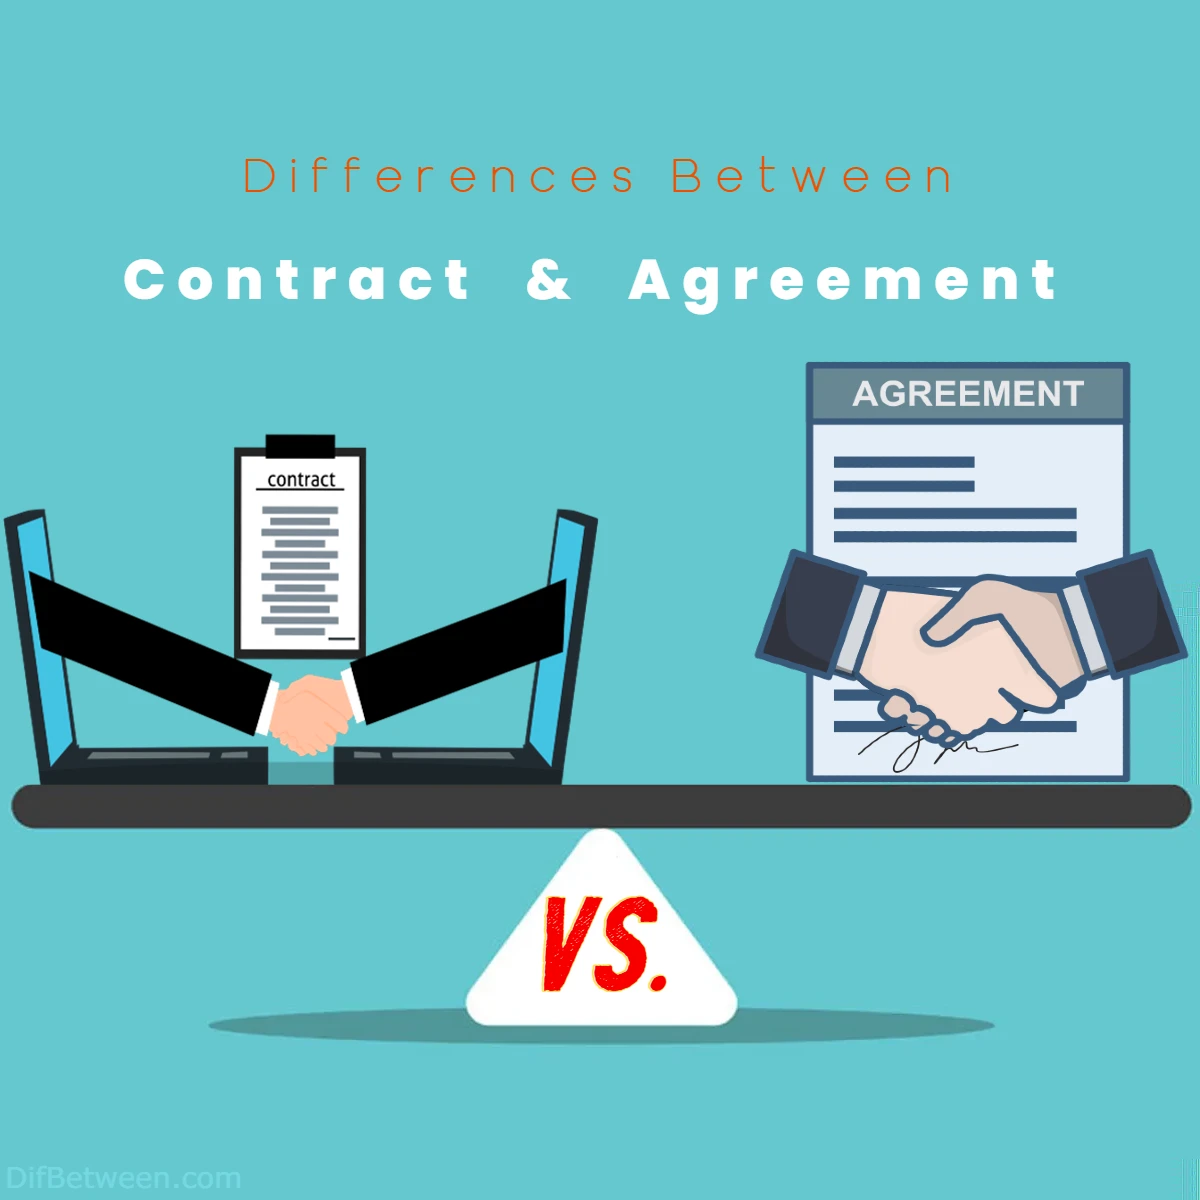 Differences Between Contract vs Agreement